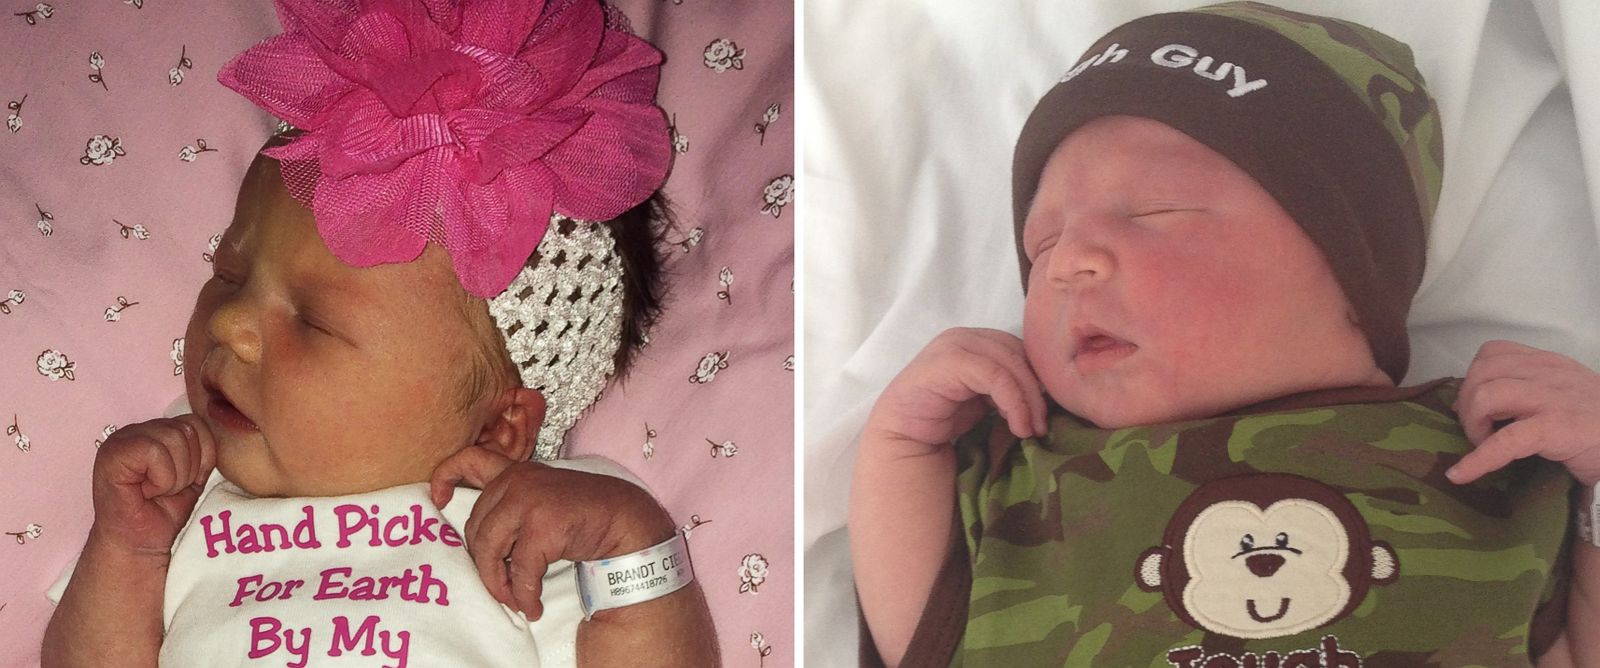 Mom of child who died from SIDS pens blog to new baby